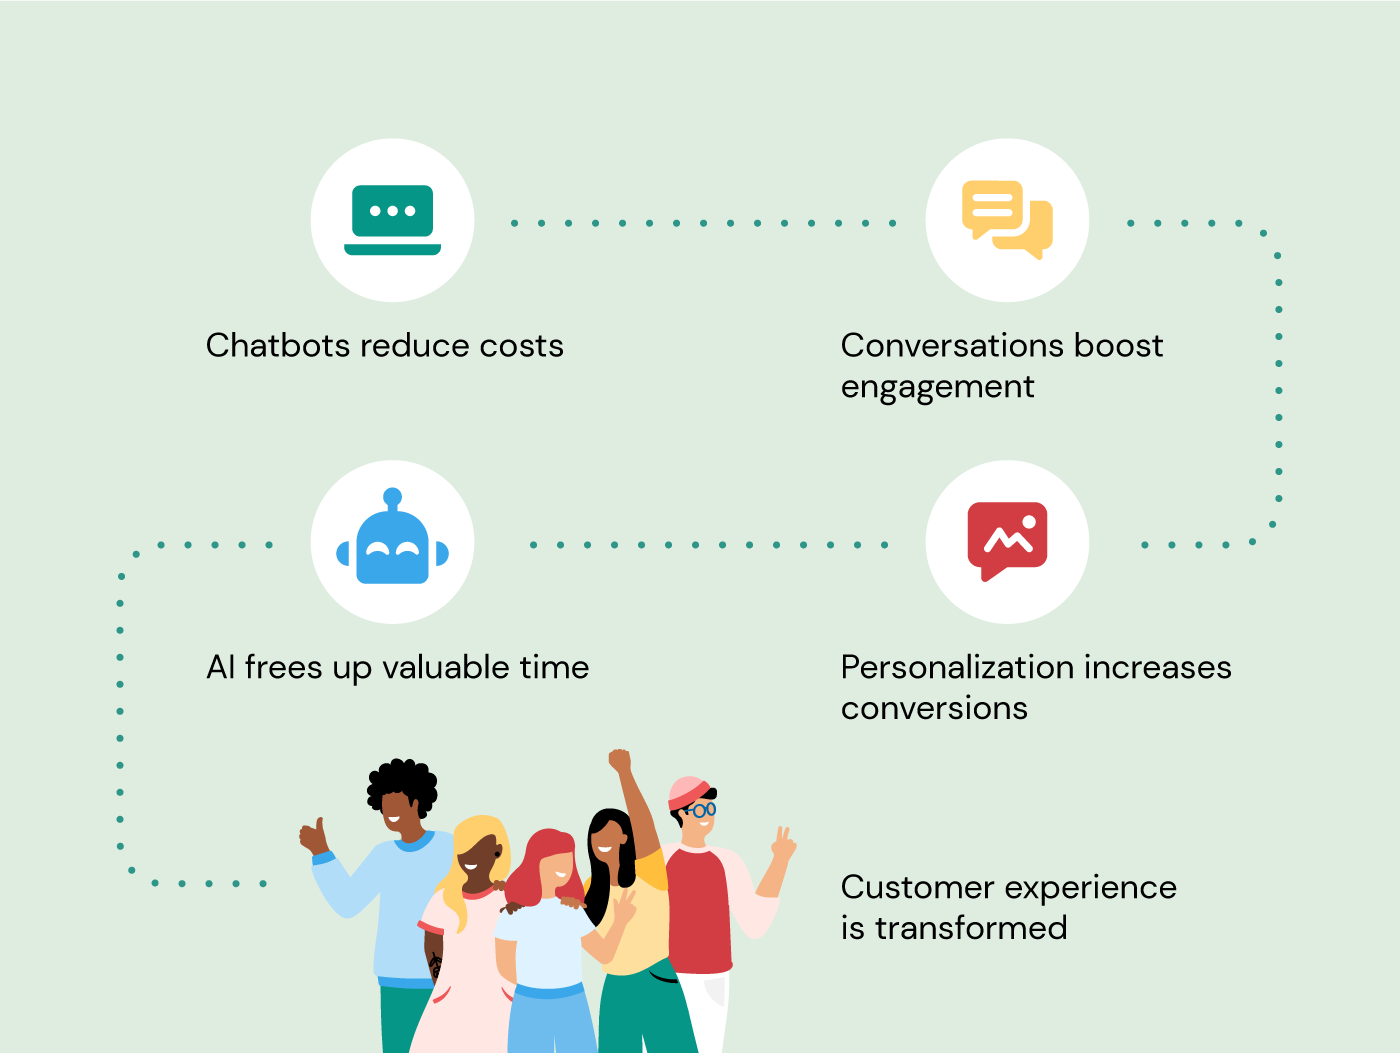 ROI with customer experience transformation